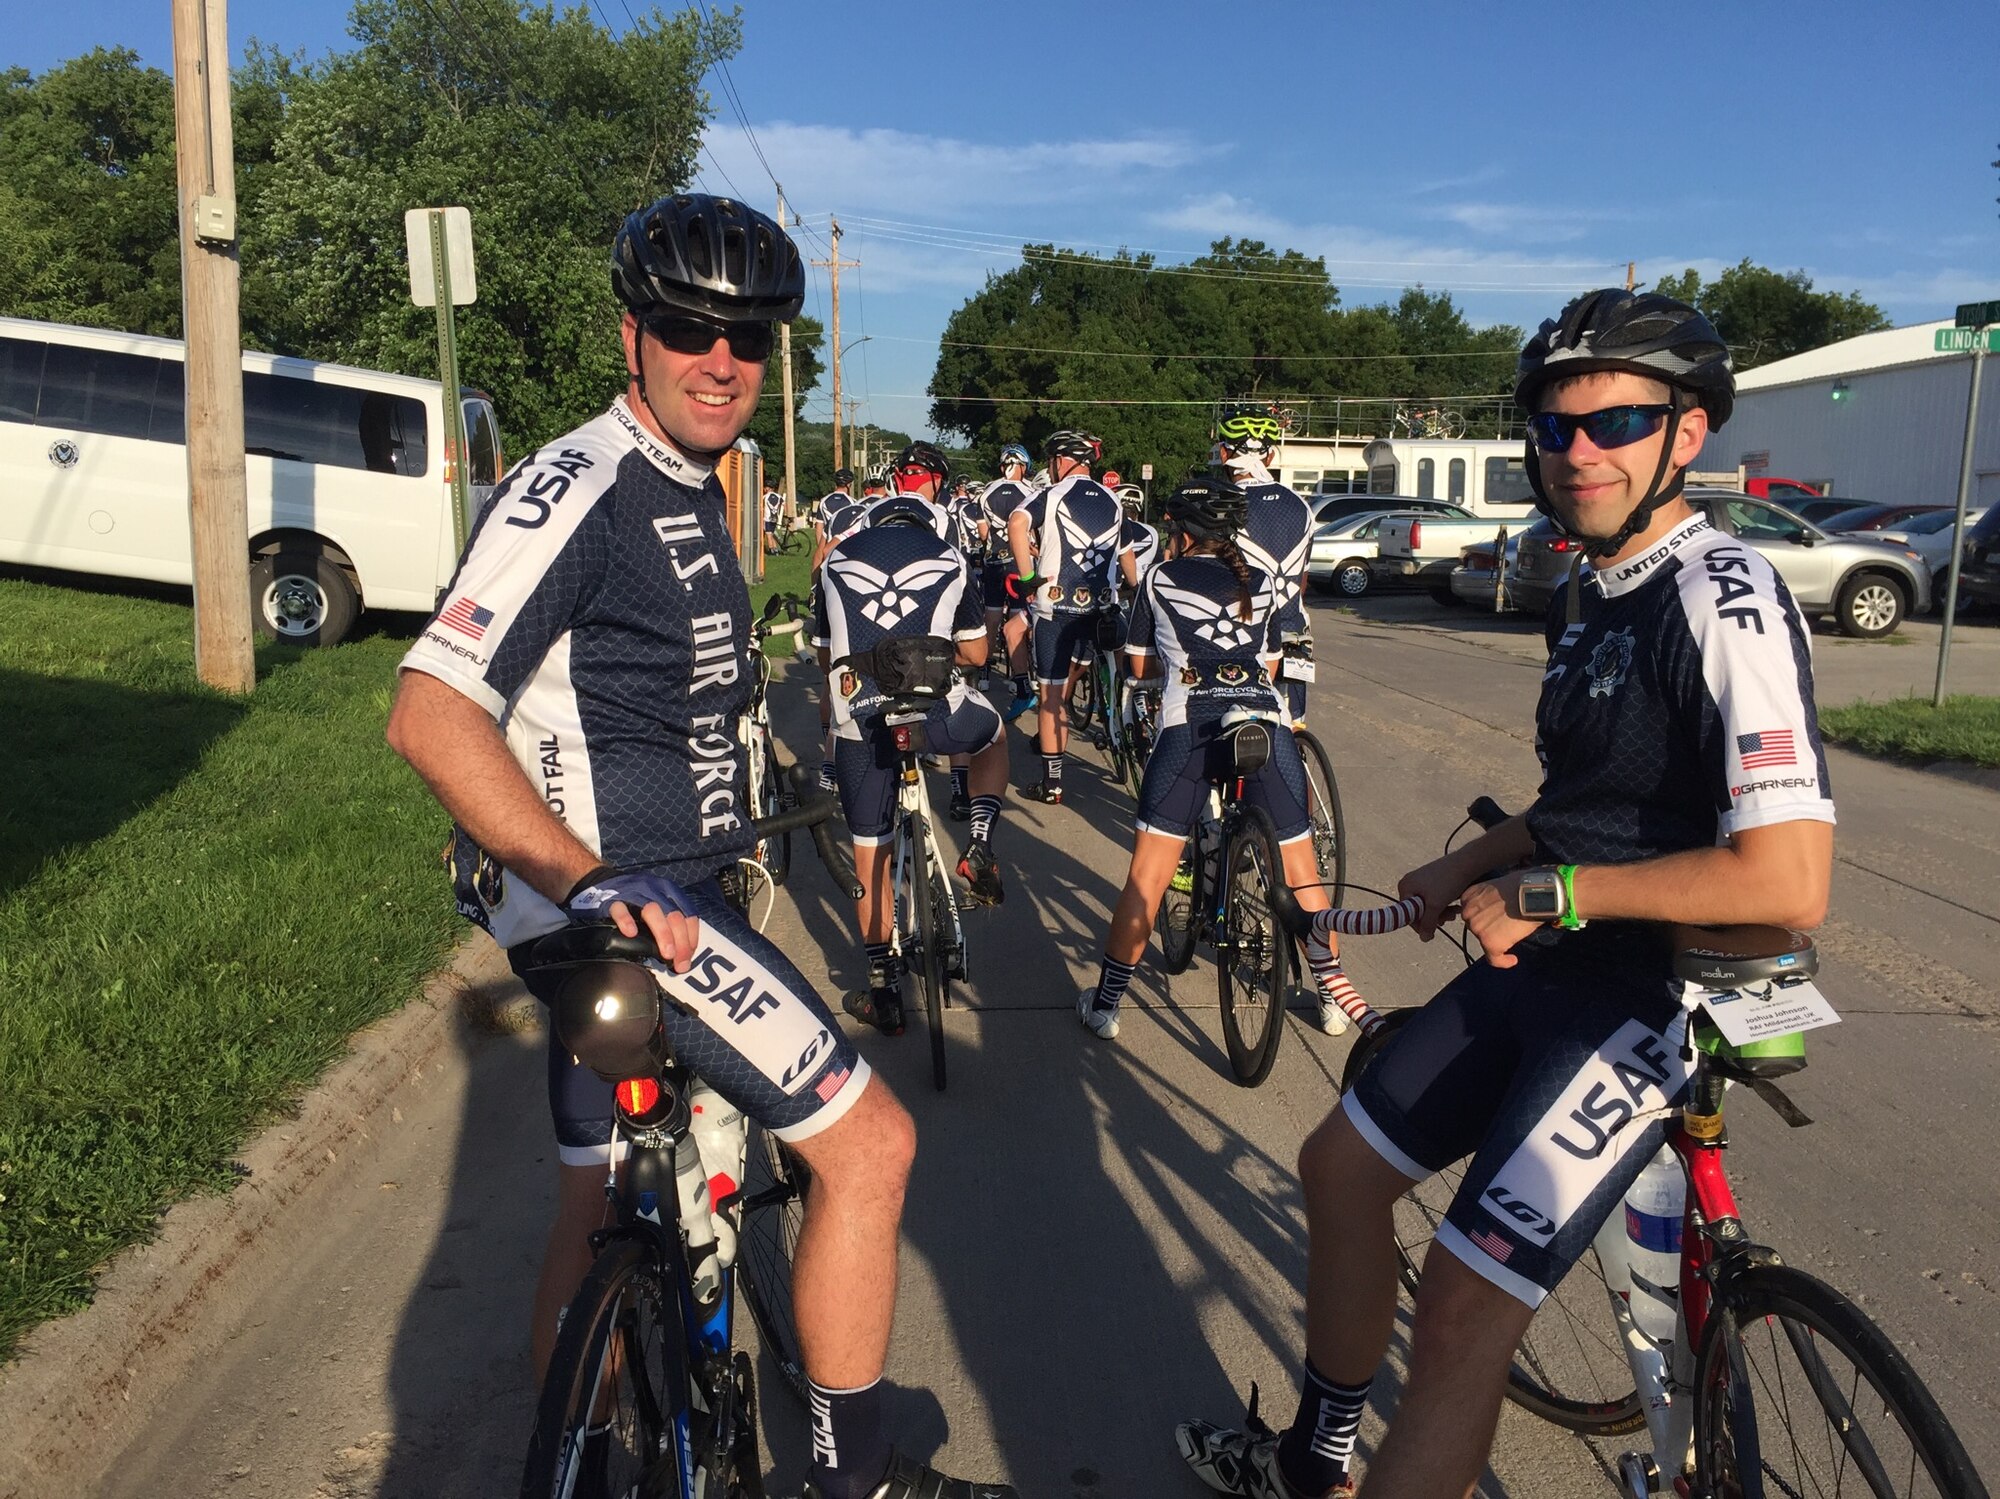 U.S. Air Force Tech. Sgt. Joshua Johnson, right, 100th Operations Support Squadron NCO in charge of Airfield Management training, poses for a photograph during a cycling event July 24, 2016, in Glenwood, Iowa. The annual event took place in July and honored veterans with a special stage ceremony and a 21 gun salute by the American legion. (Courtesy photo)